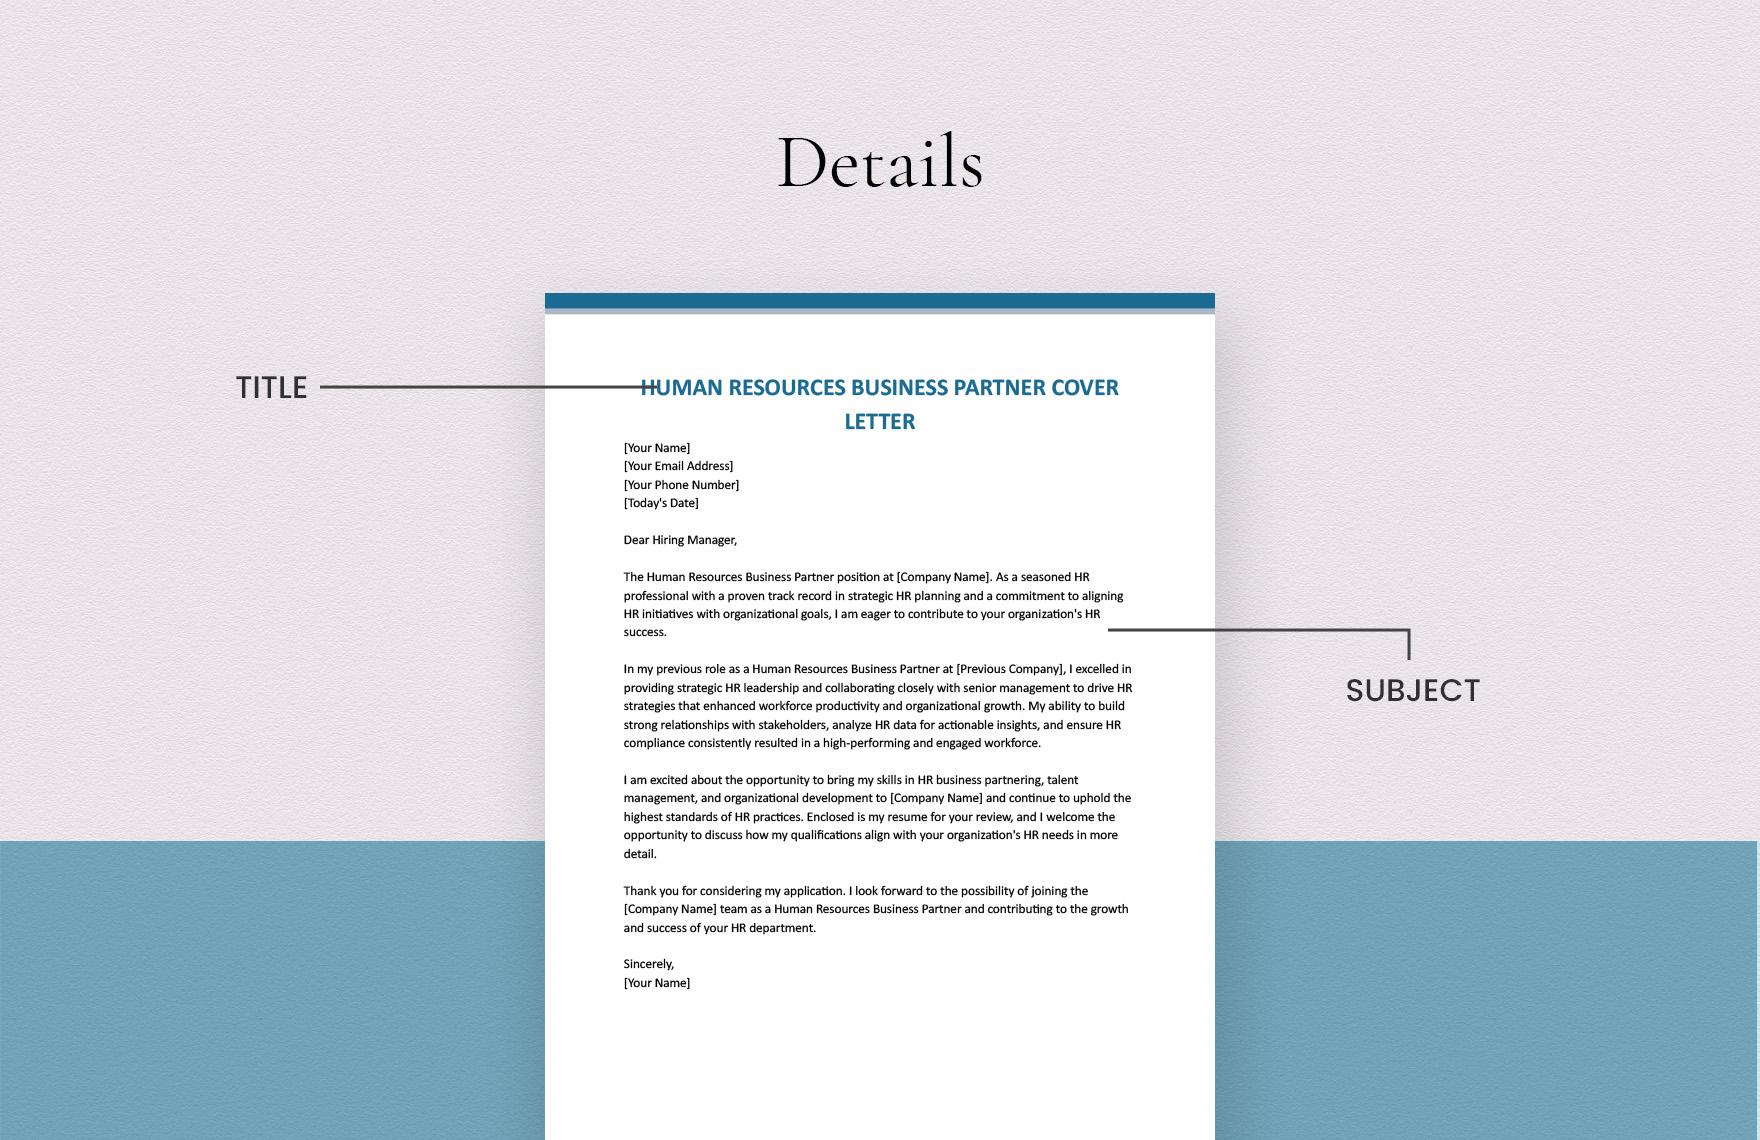 Human Resources Business Partner Cover Letter